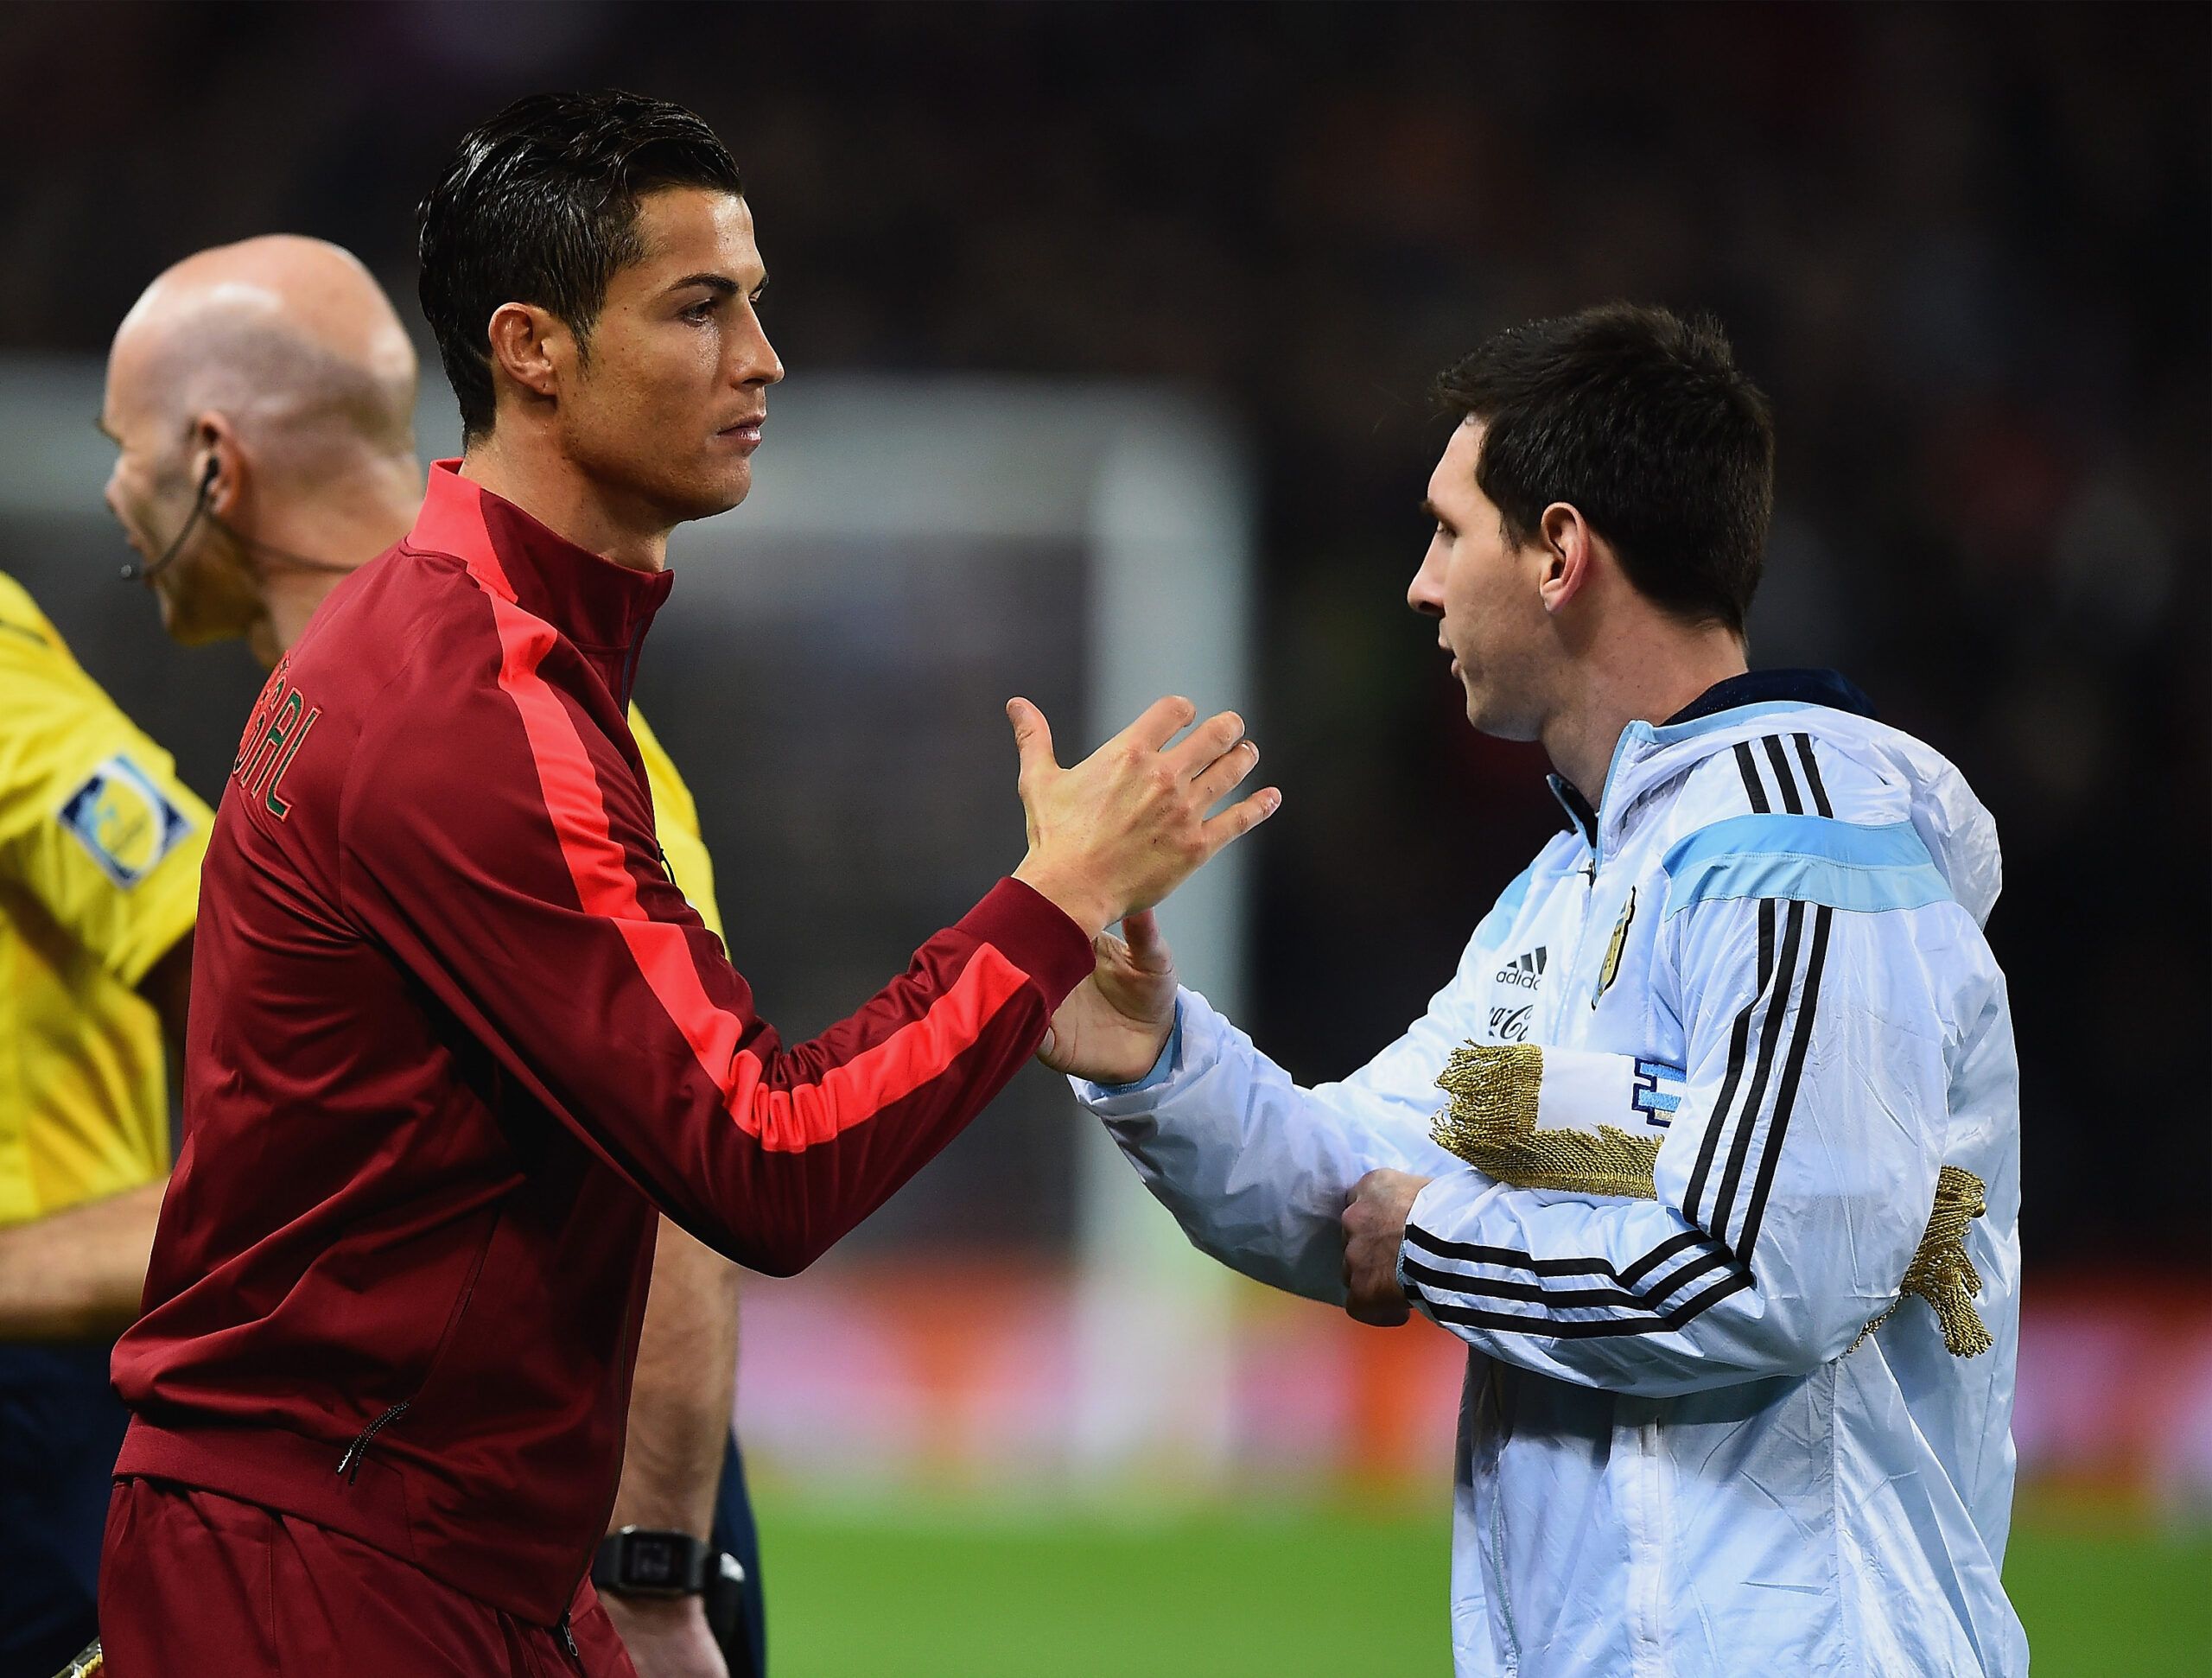 Cristiano Ronaldo and Lionel Messi with their national teams